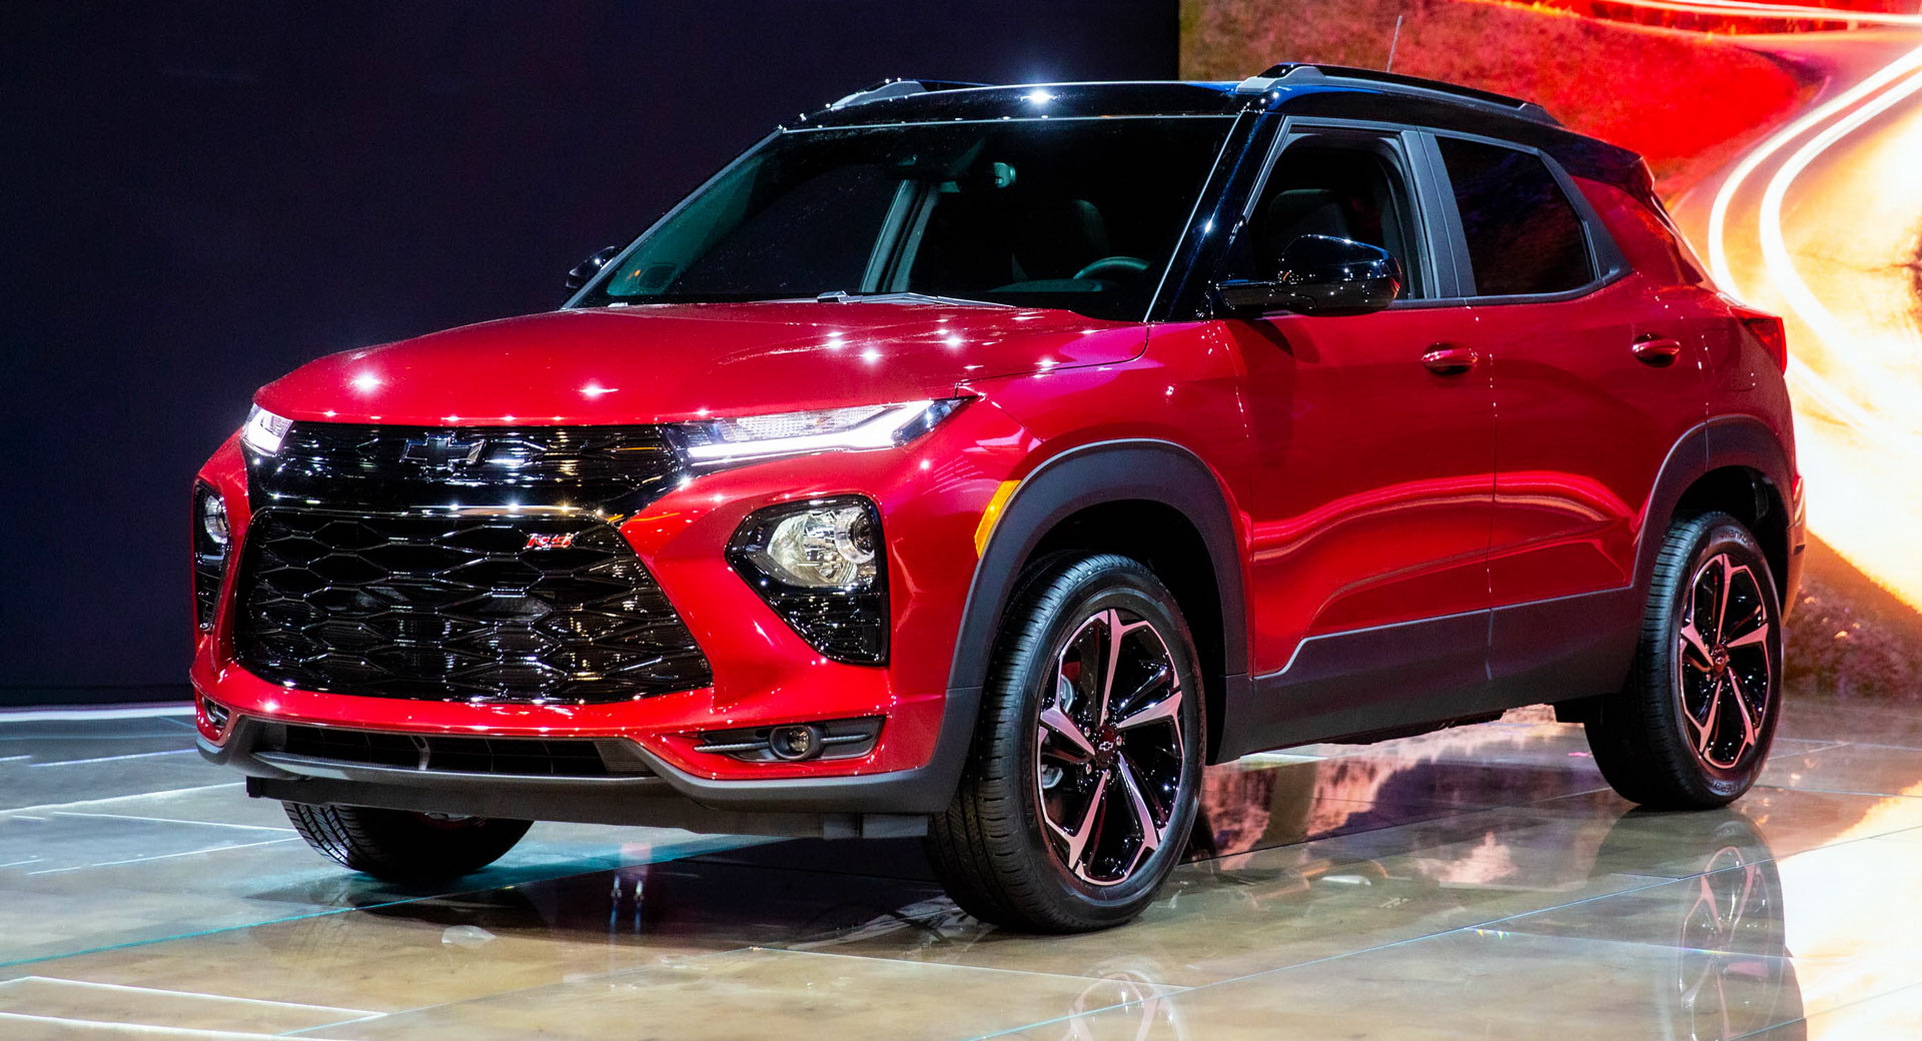 a new chevrolet trailblazer is here for 2021 but it’s